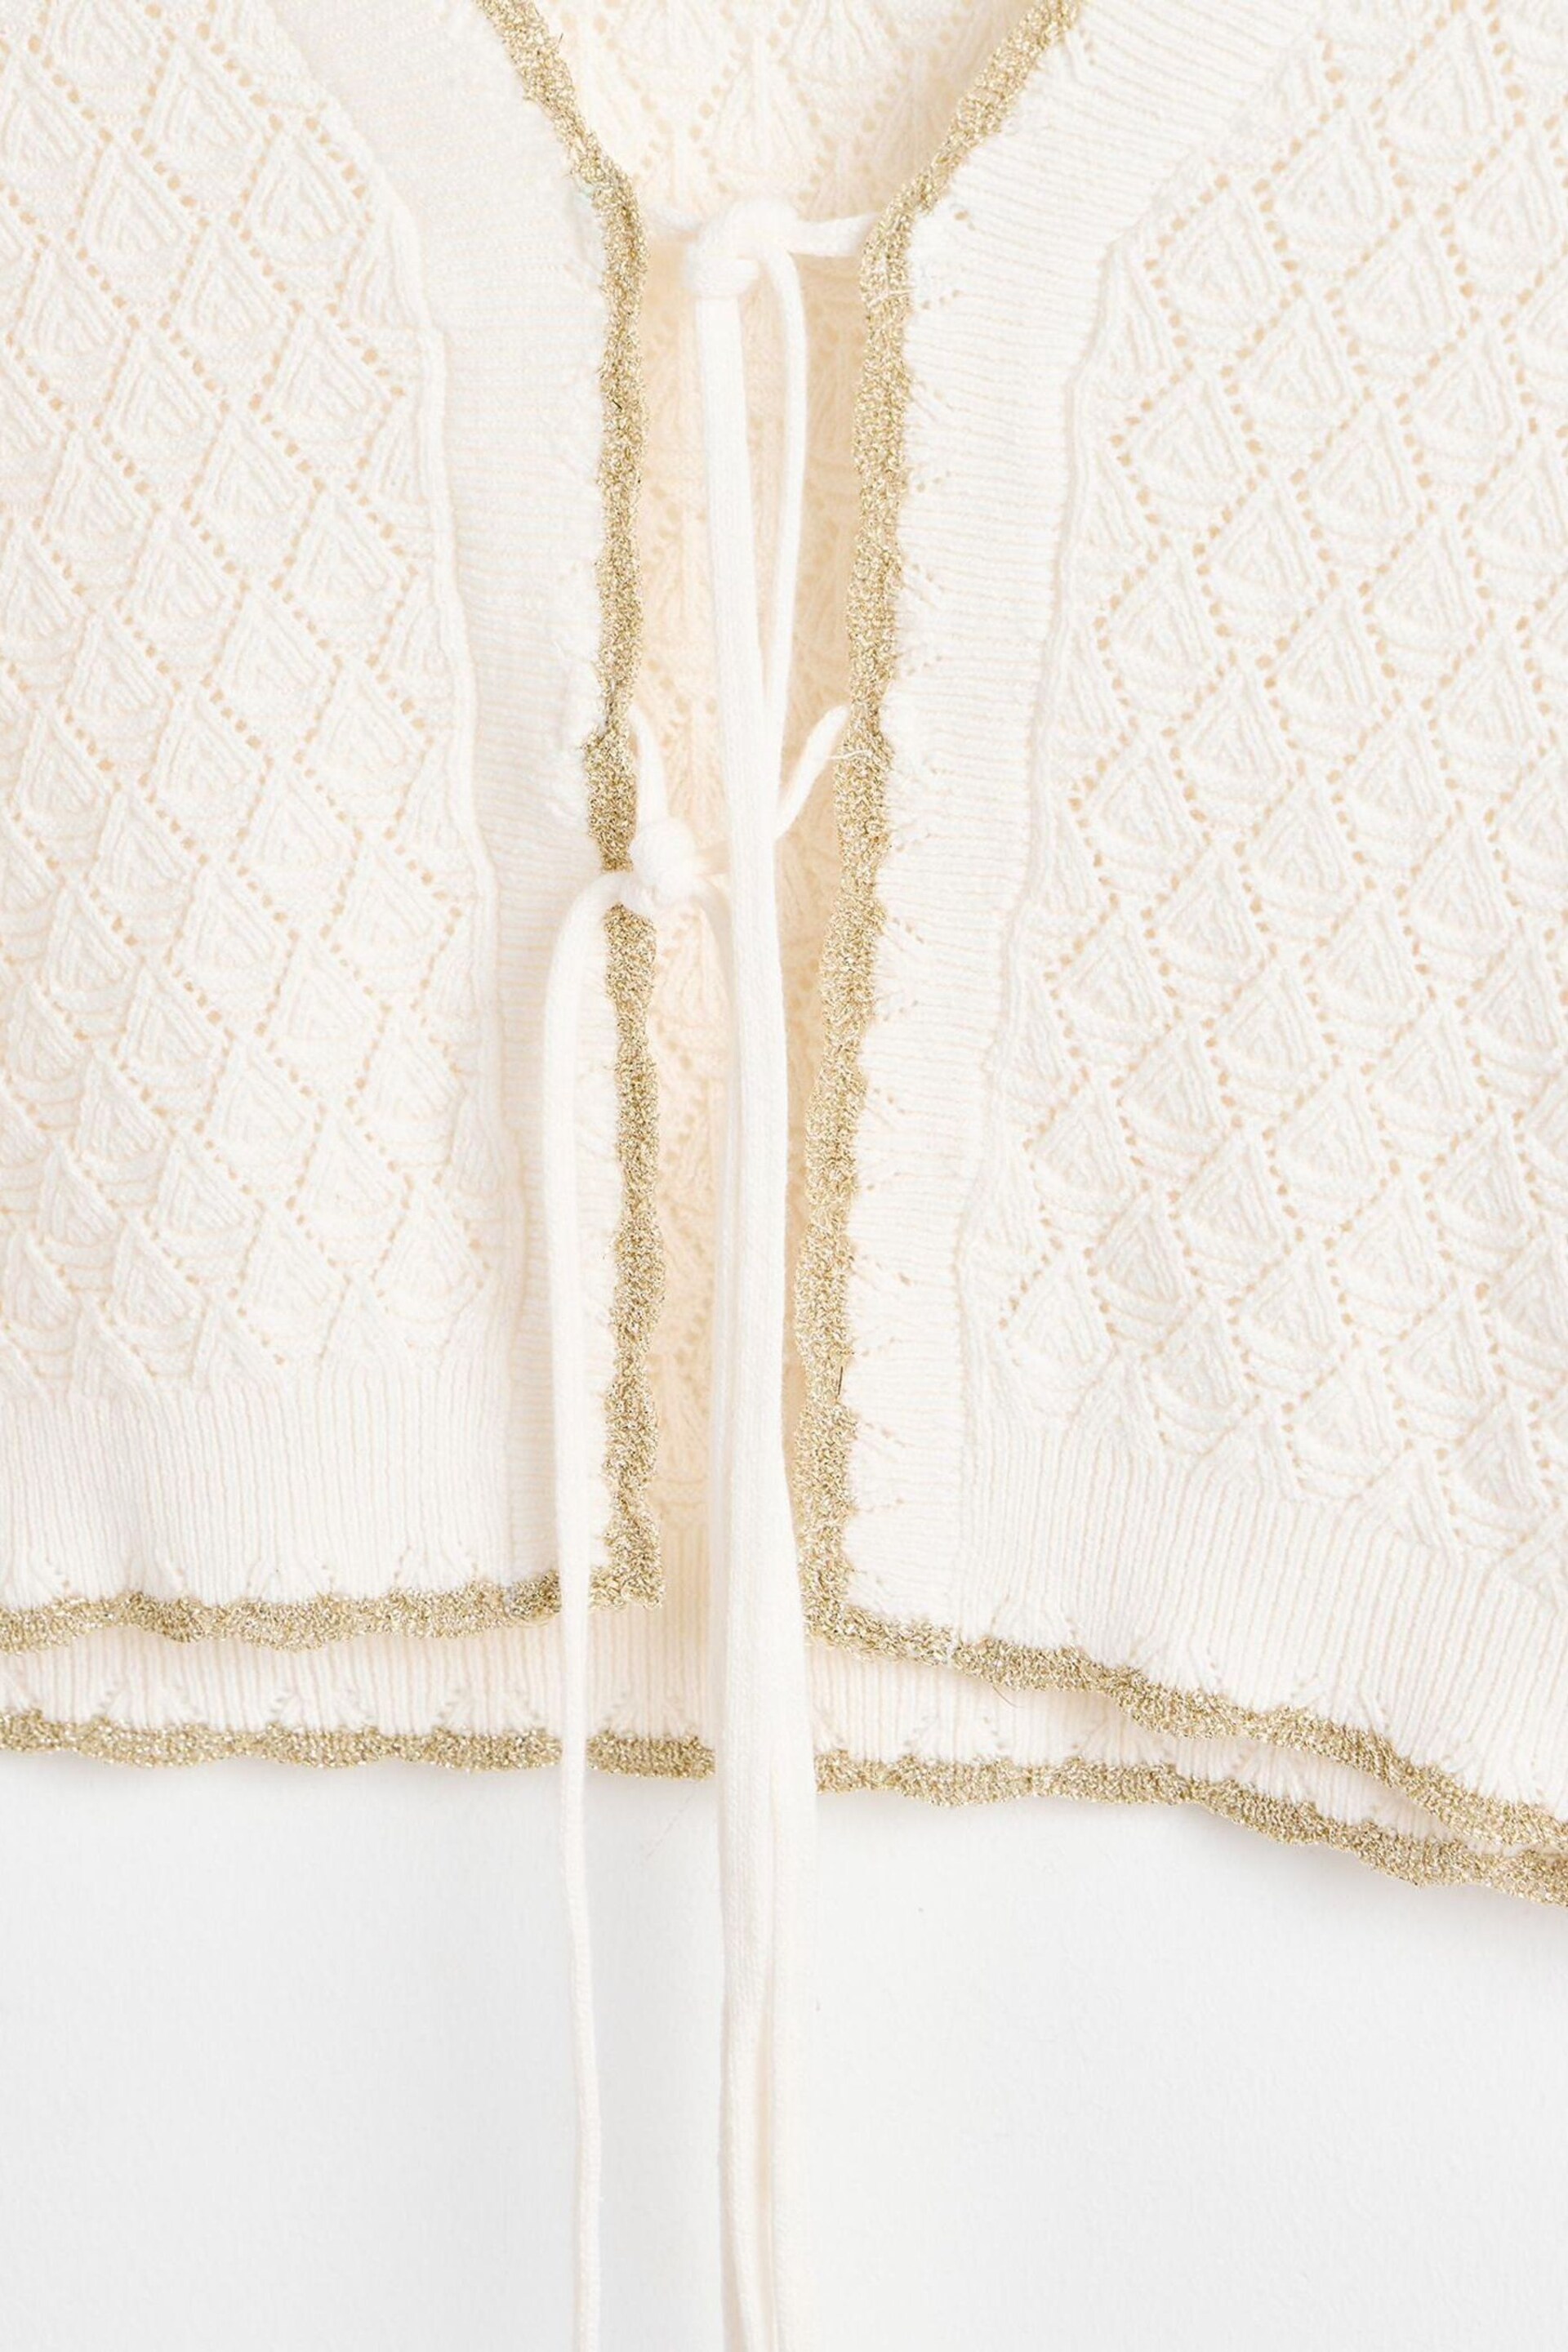 Oliver Bonas White Sparkle Knitted Tie Cardigan - Image 9 of 9